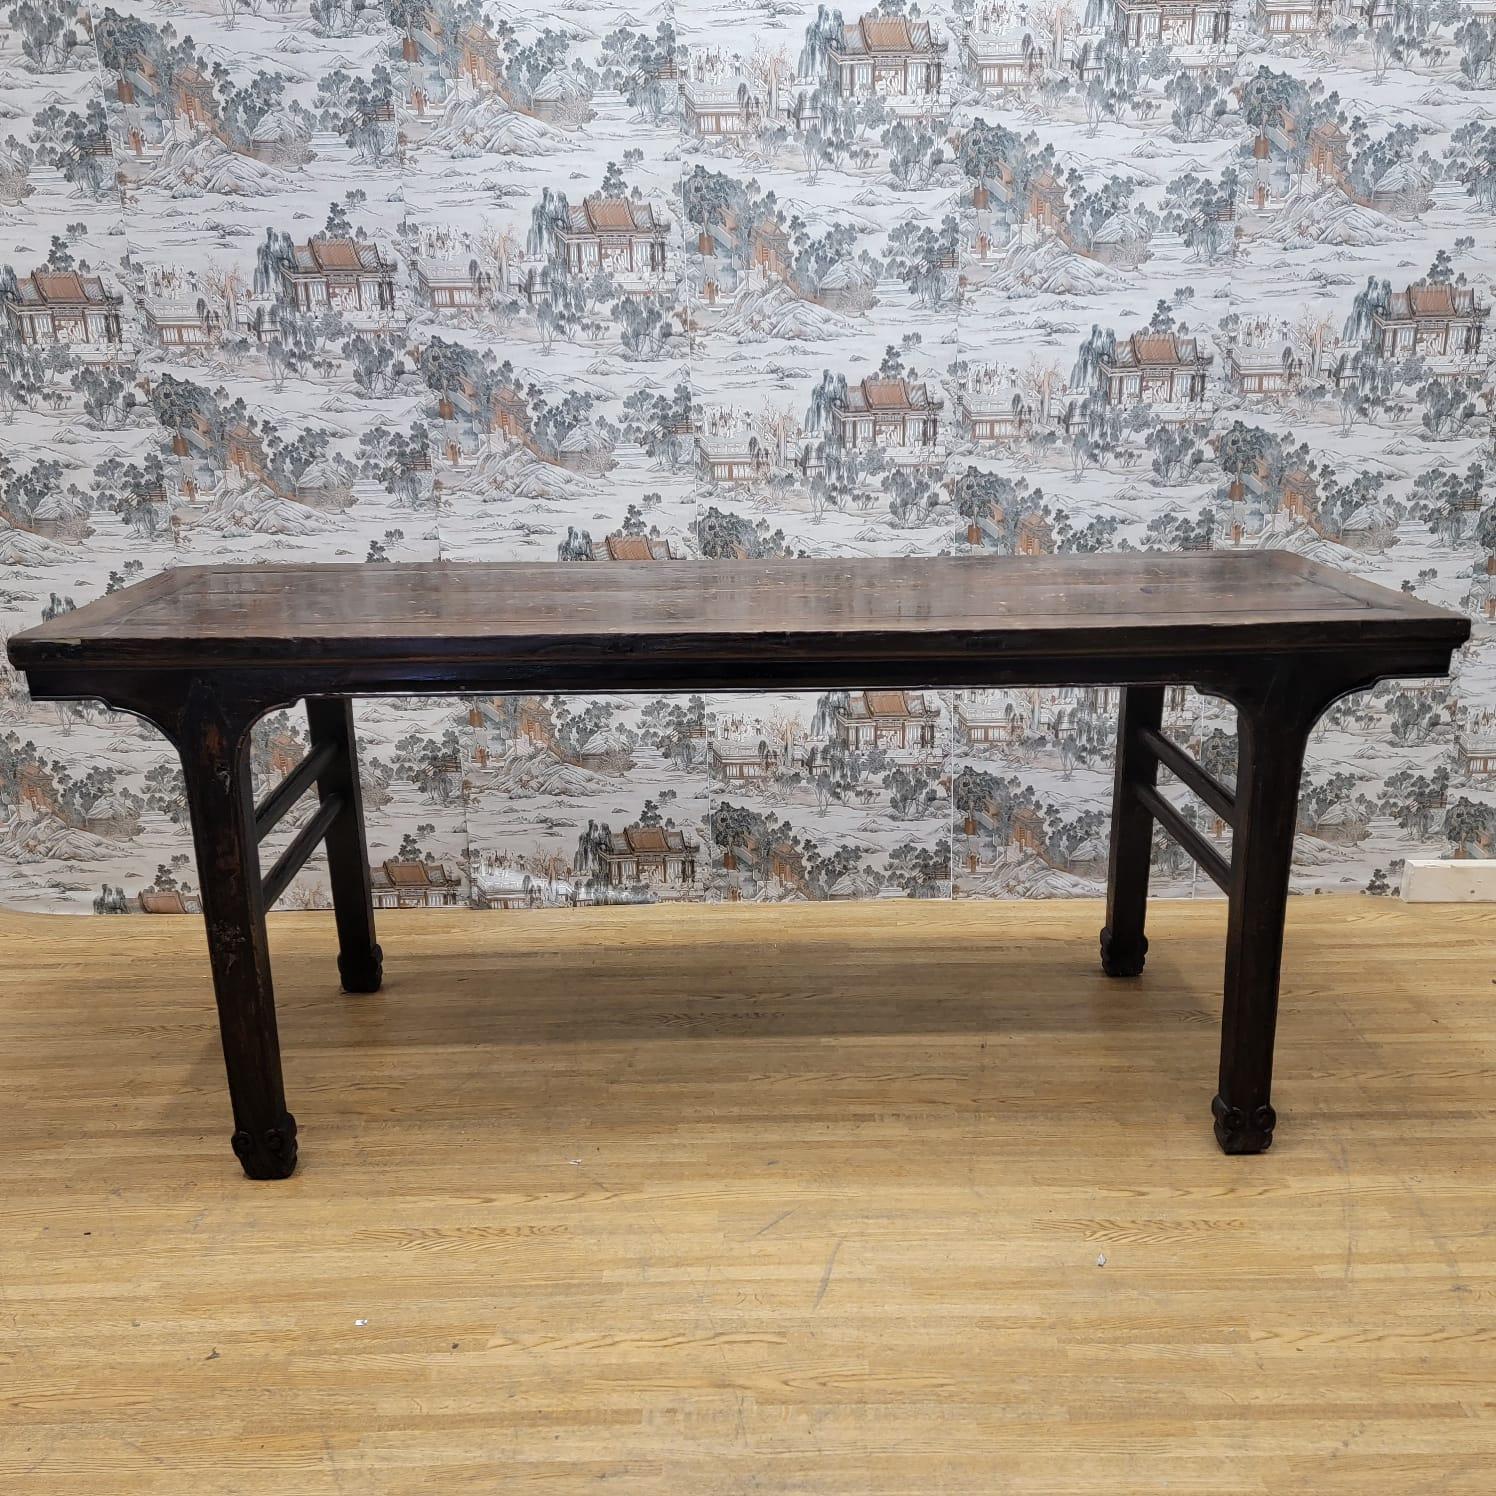 Rare Antique Shanxi Province Large Elm Calligraphy Desk

Rare calligraphy table in great antique condition, with original color and patina. Can be used as a large desk, a tall dining table with barstools, or a sofa back table for a 4 seat large